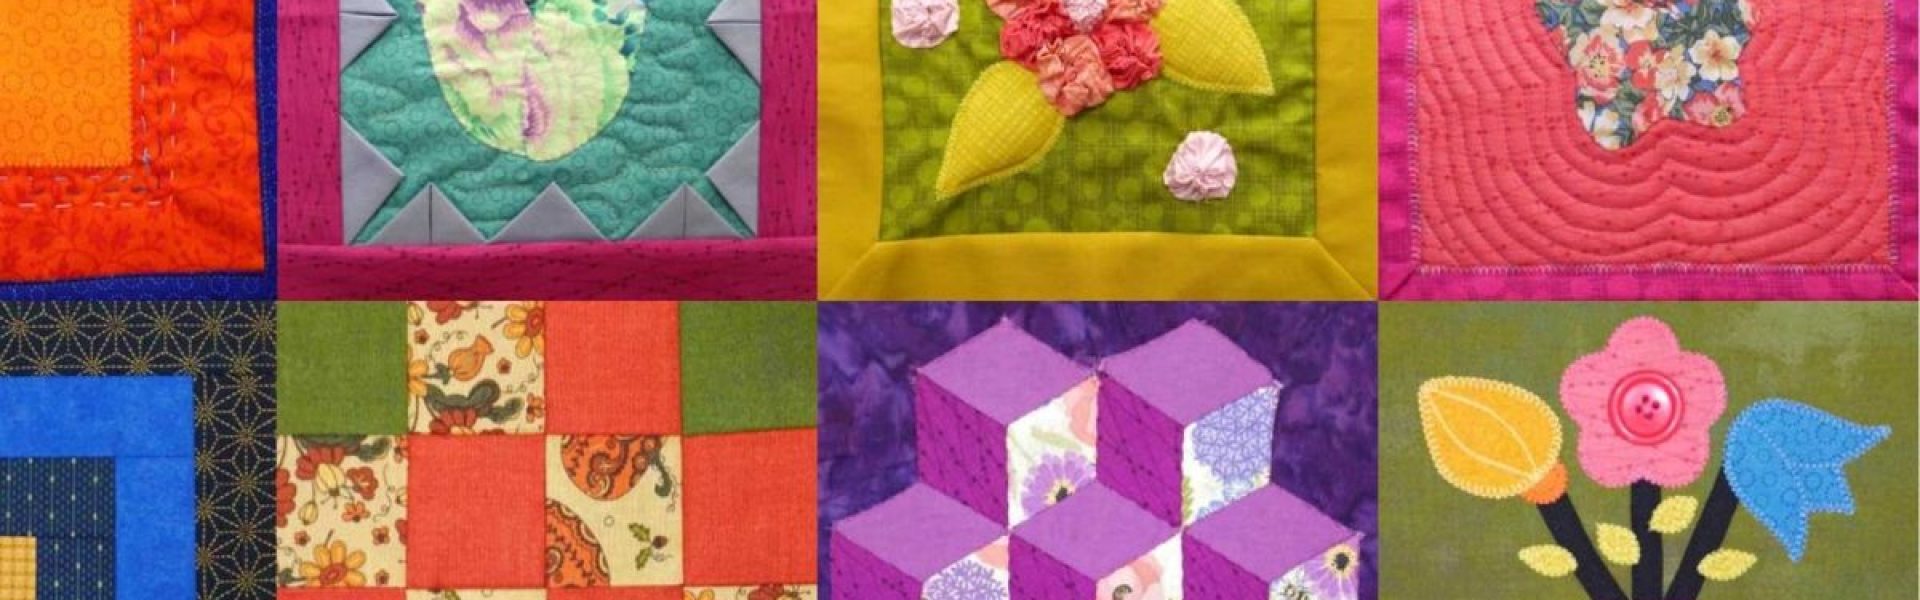 Patchwork and Quilting samples by graduate Rebecca Tickle.